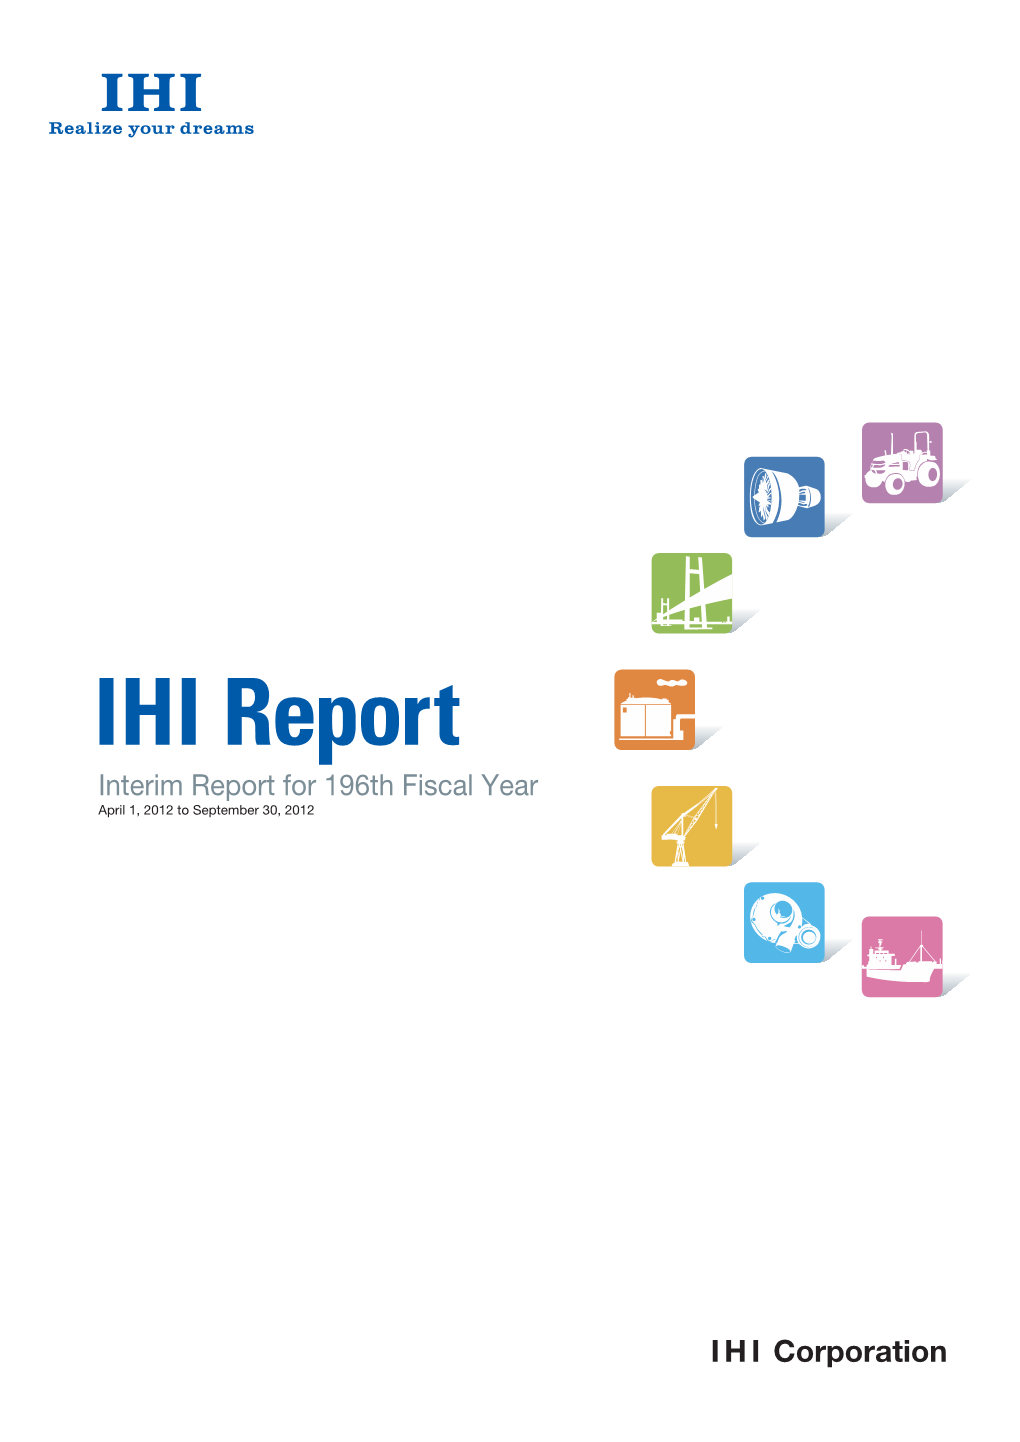 IHI Report Interim Report for 196Th Fiscal Year April 1 to September 30